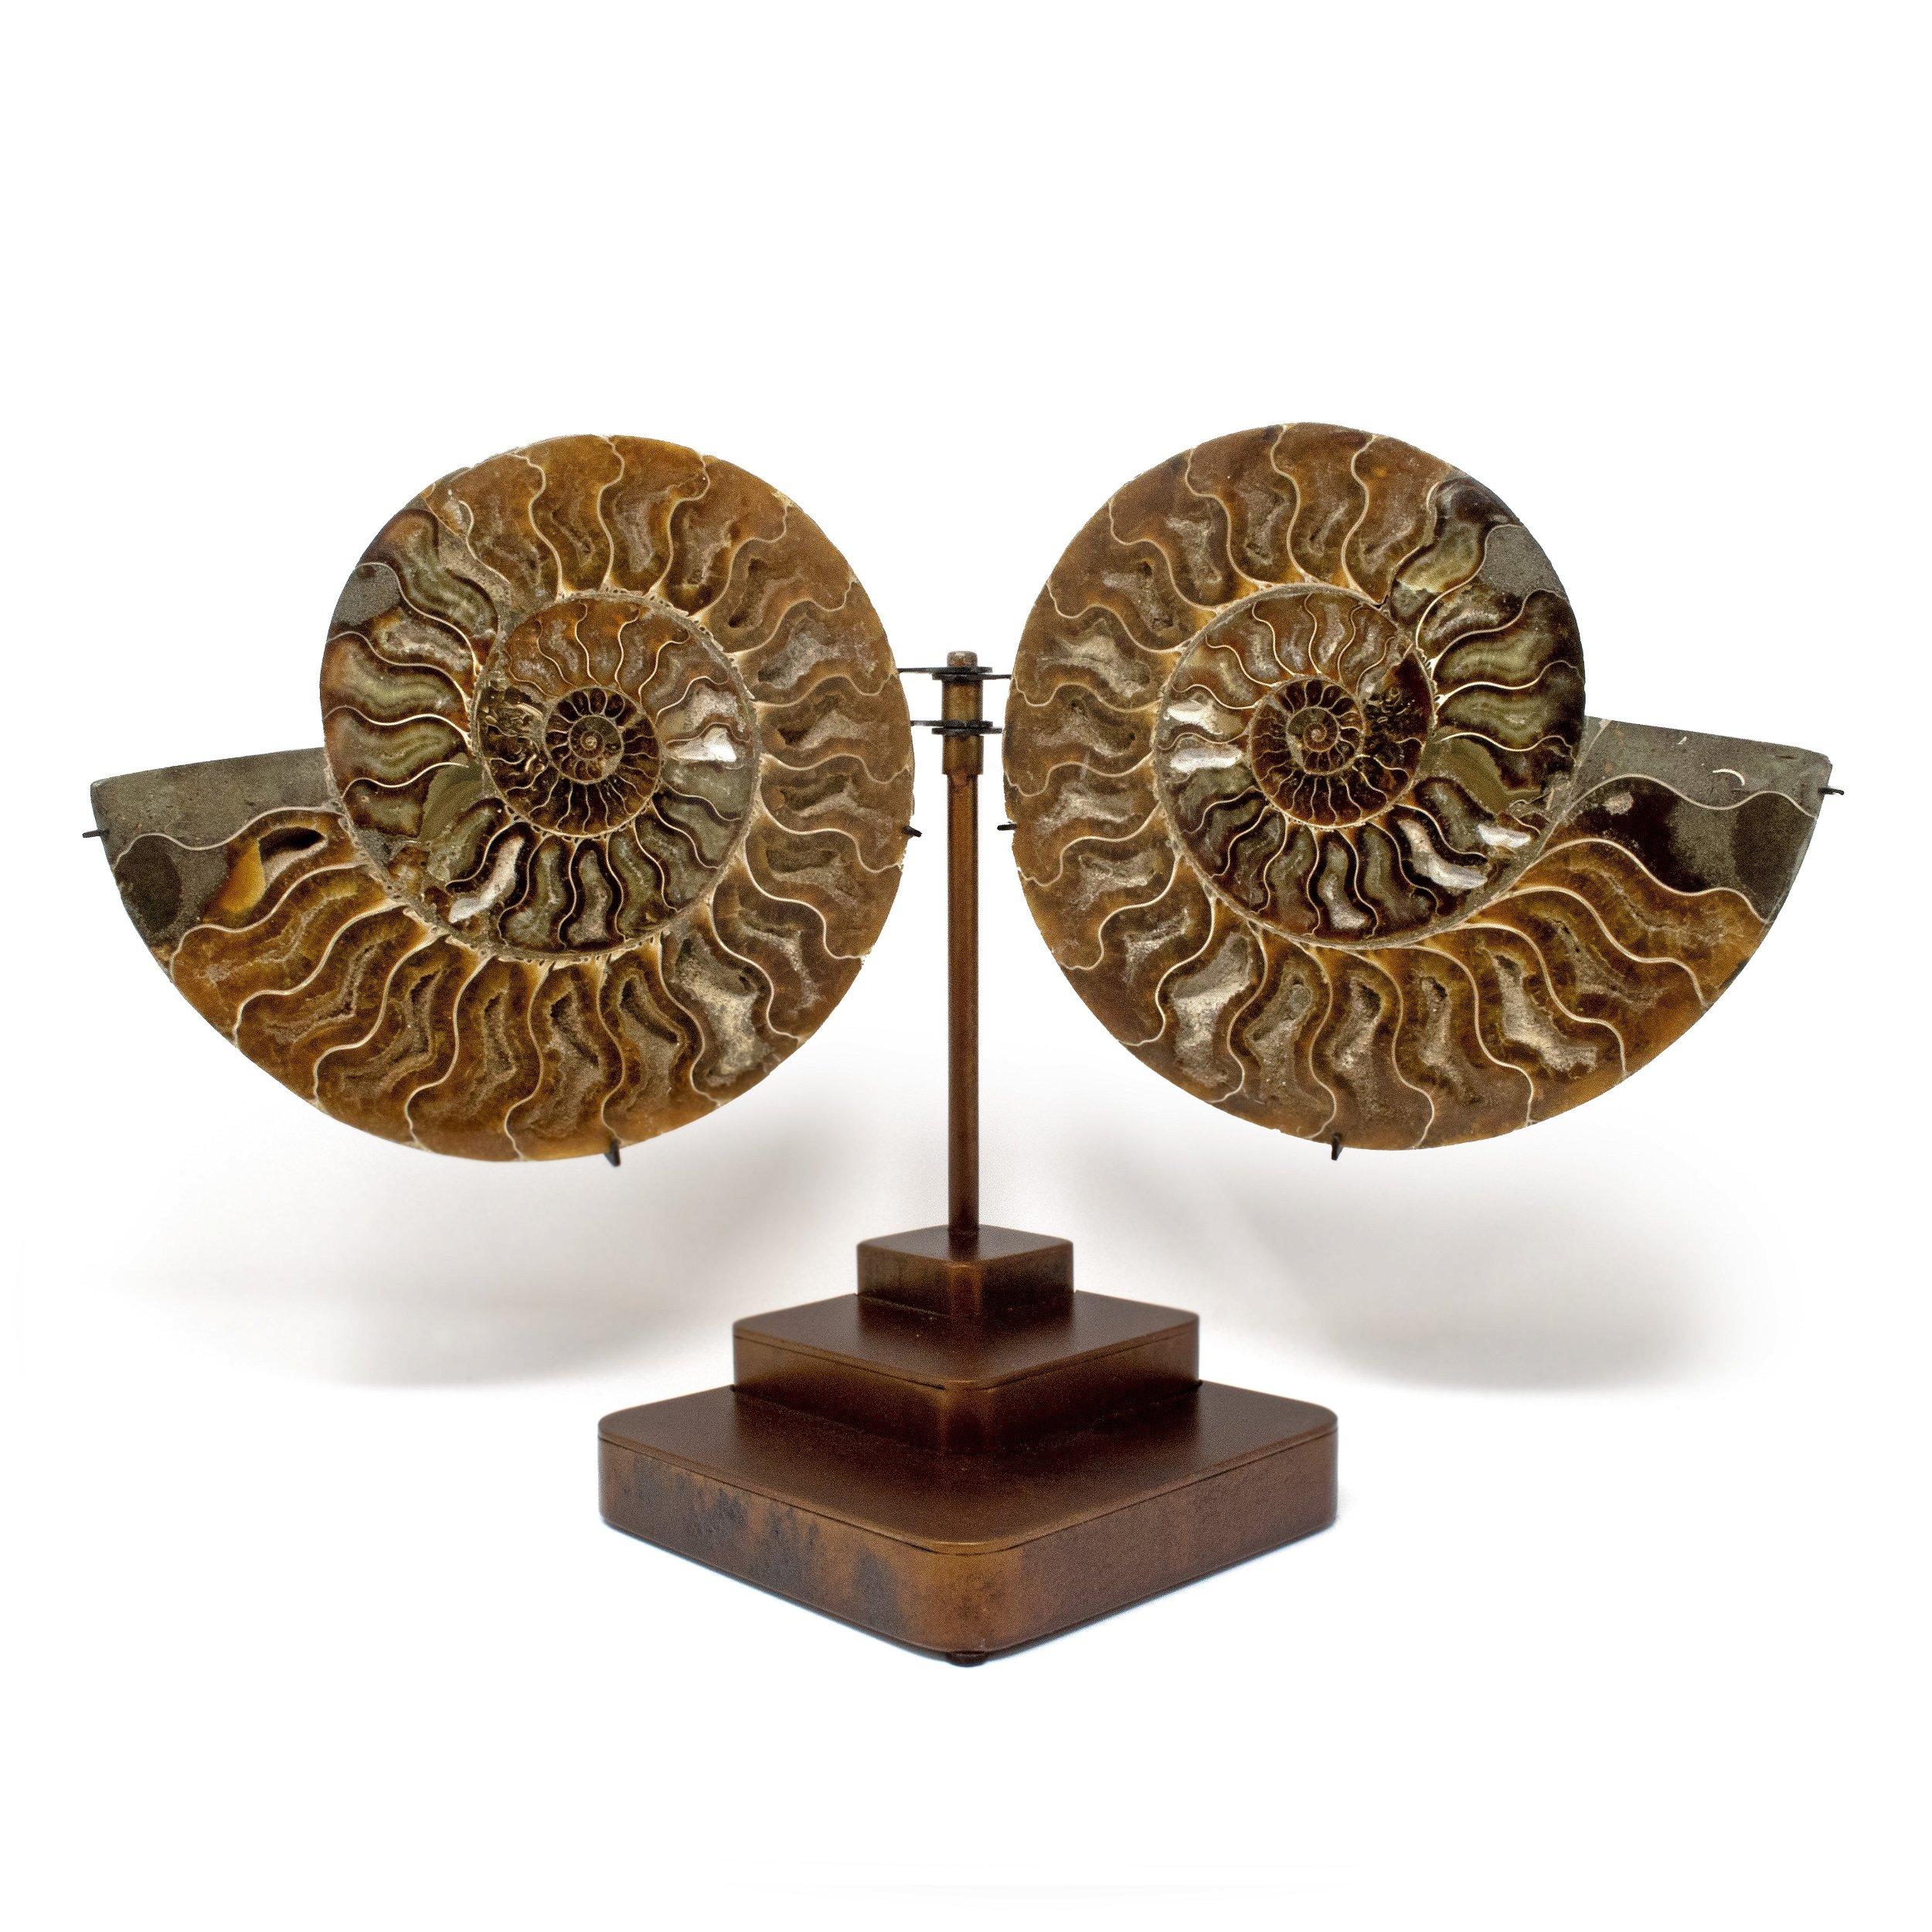 Ammonite Fossil Pair in Custom Pivot Stand with Rust Patina Finish - Rich Sienna Brown Hue with Taupe & White Inclusions